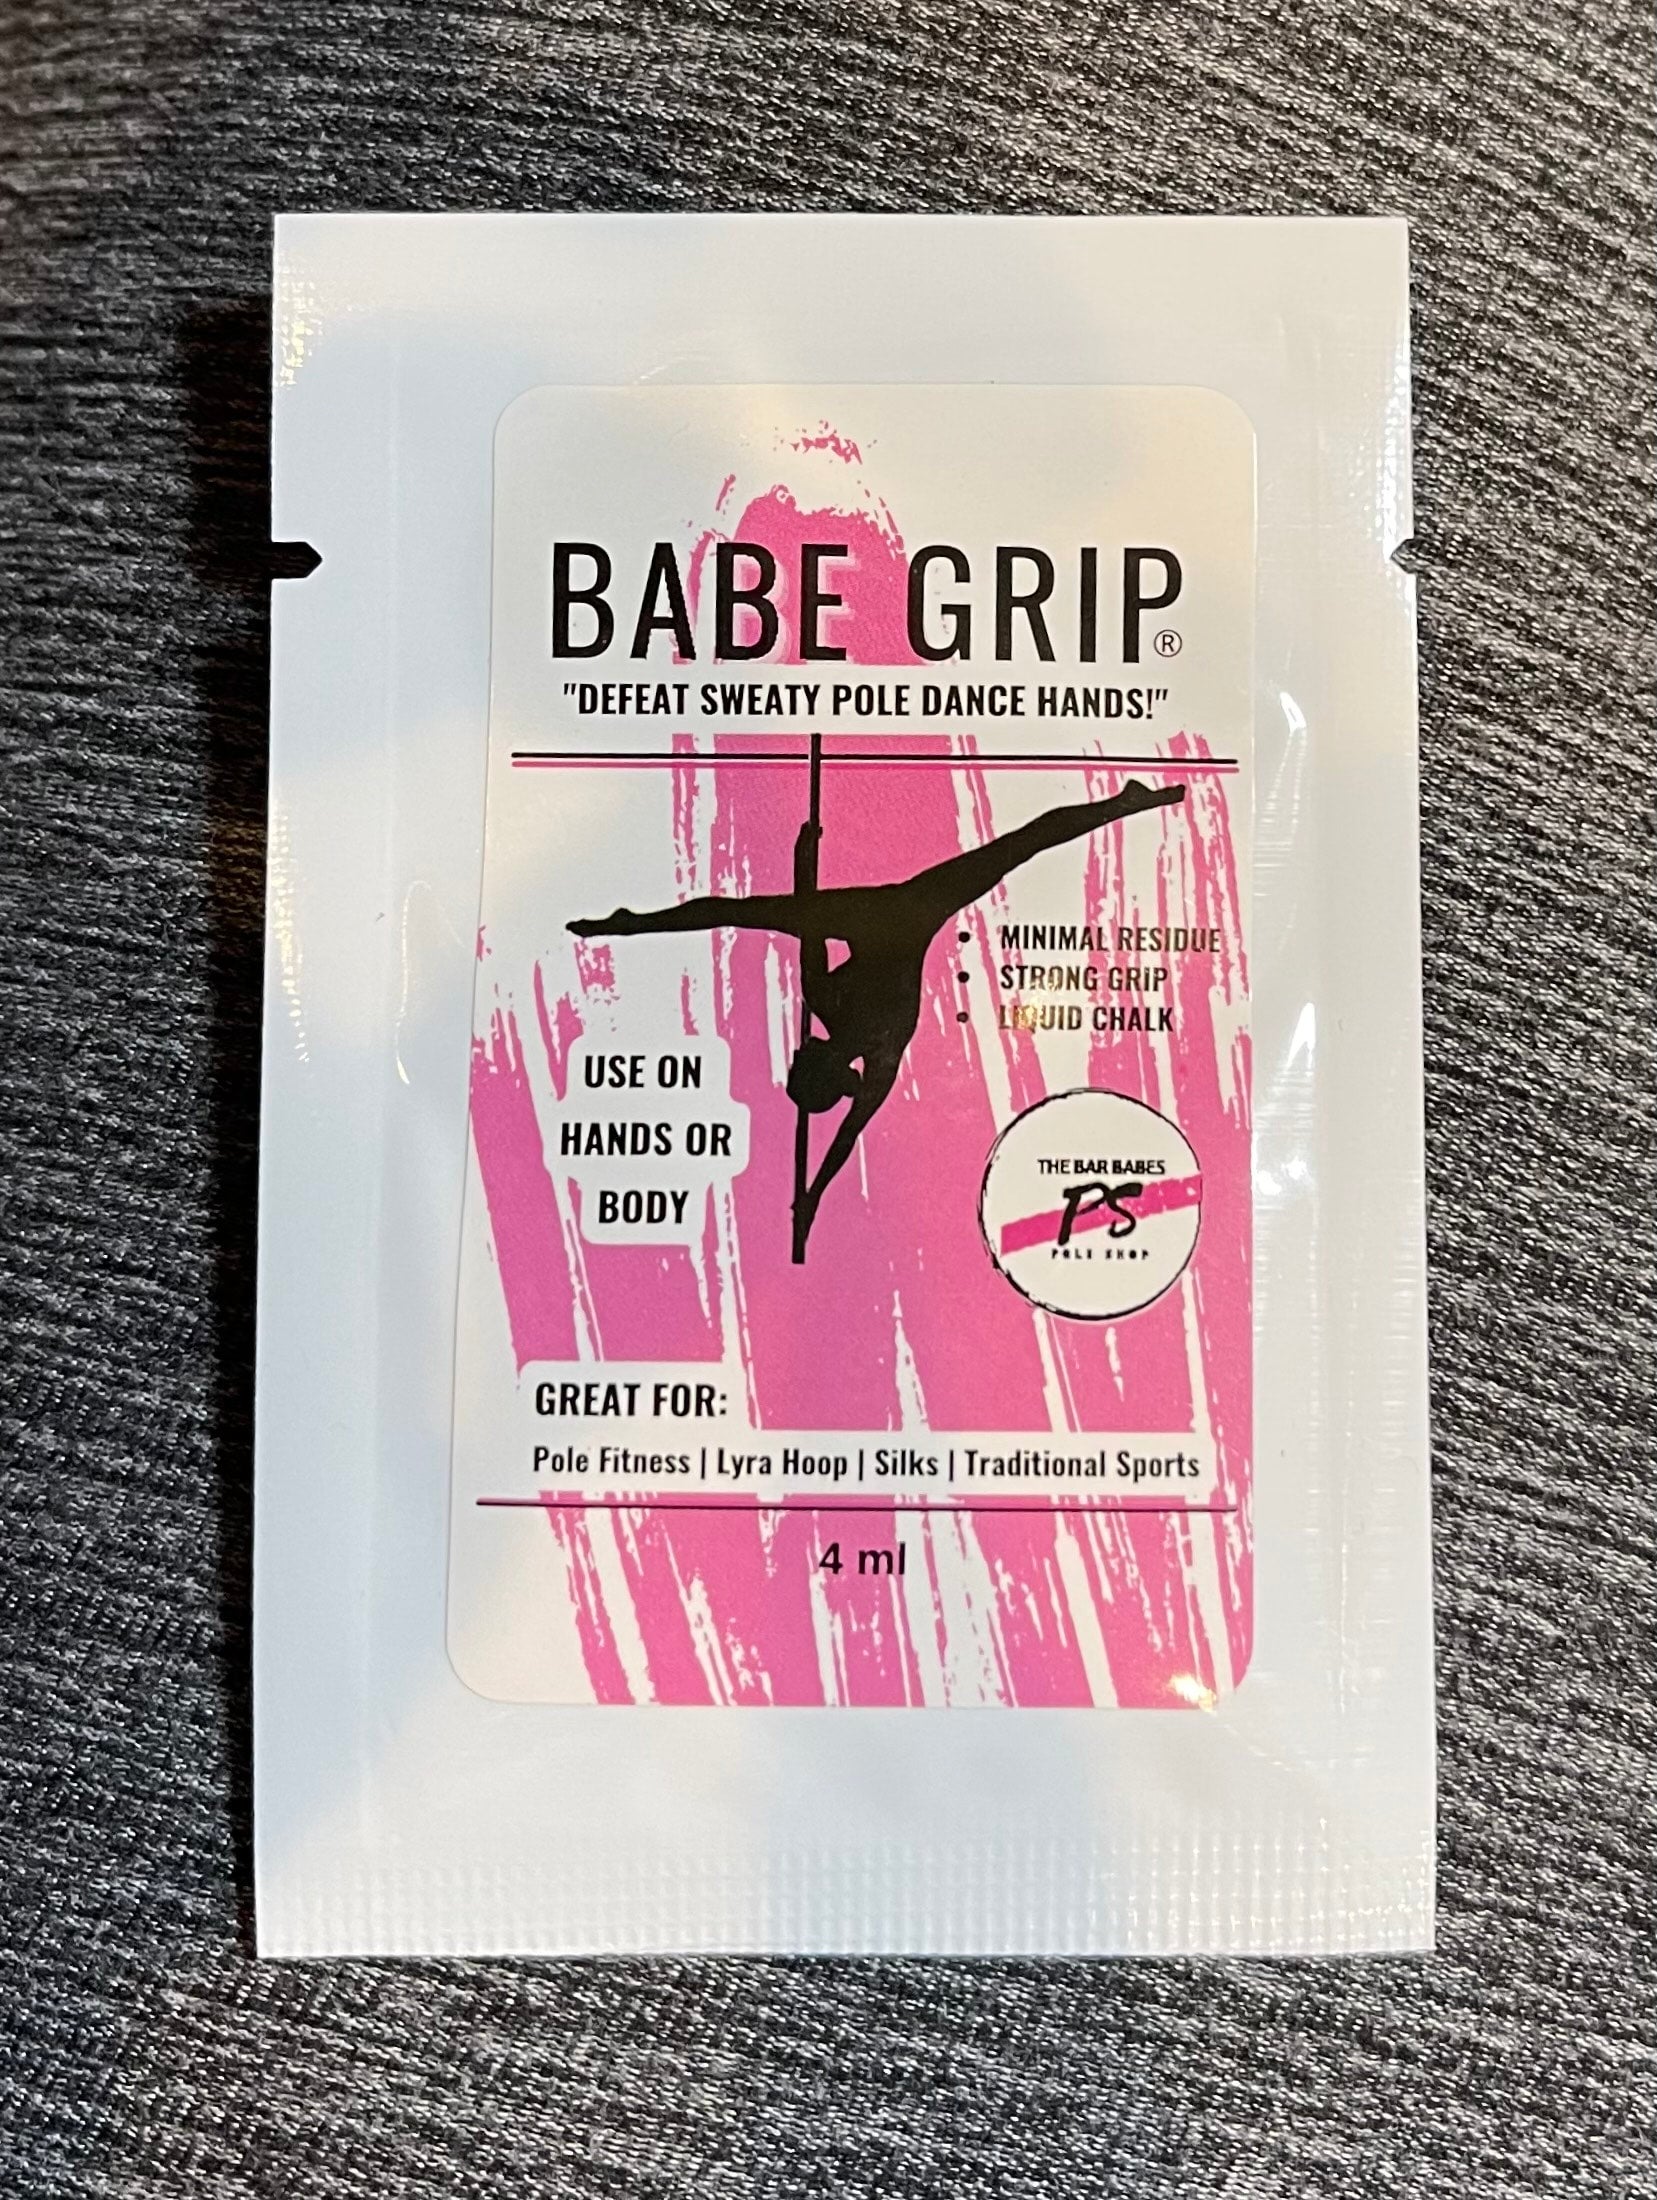 BABE Grip™: Pole Power Unleashed - Pole Dancers' Answer to Sweat-Proof  Spins